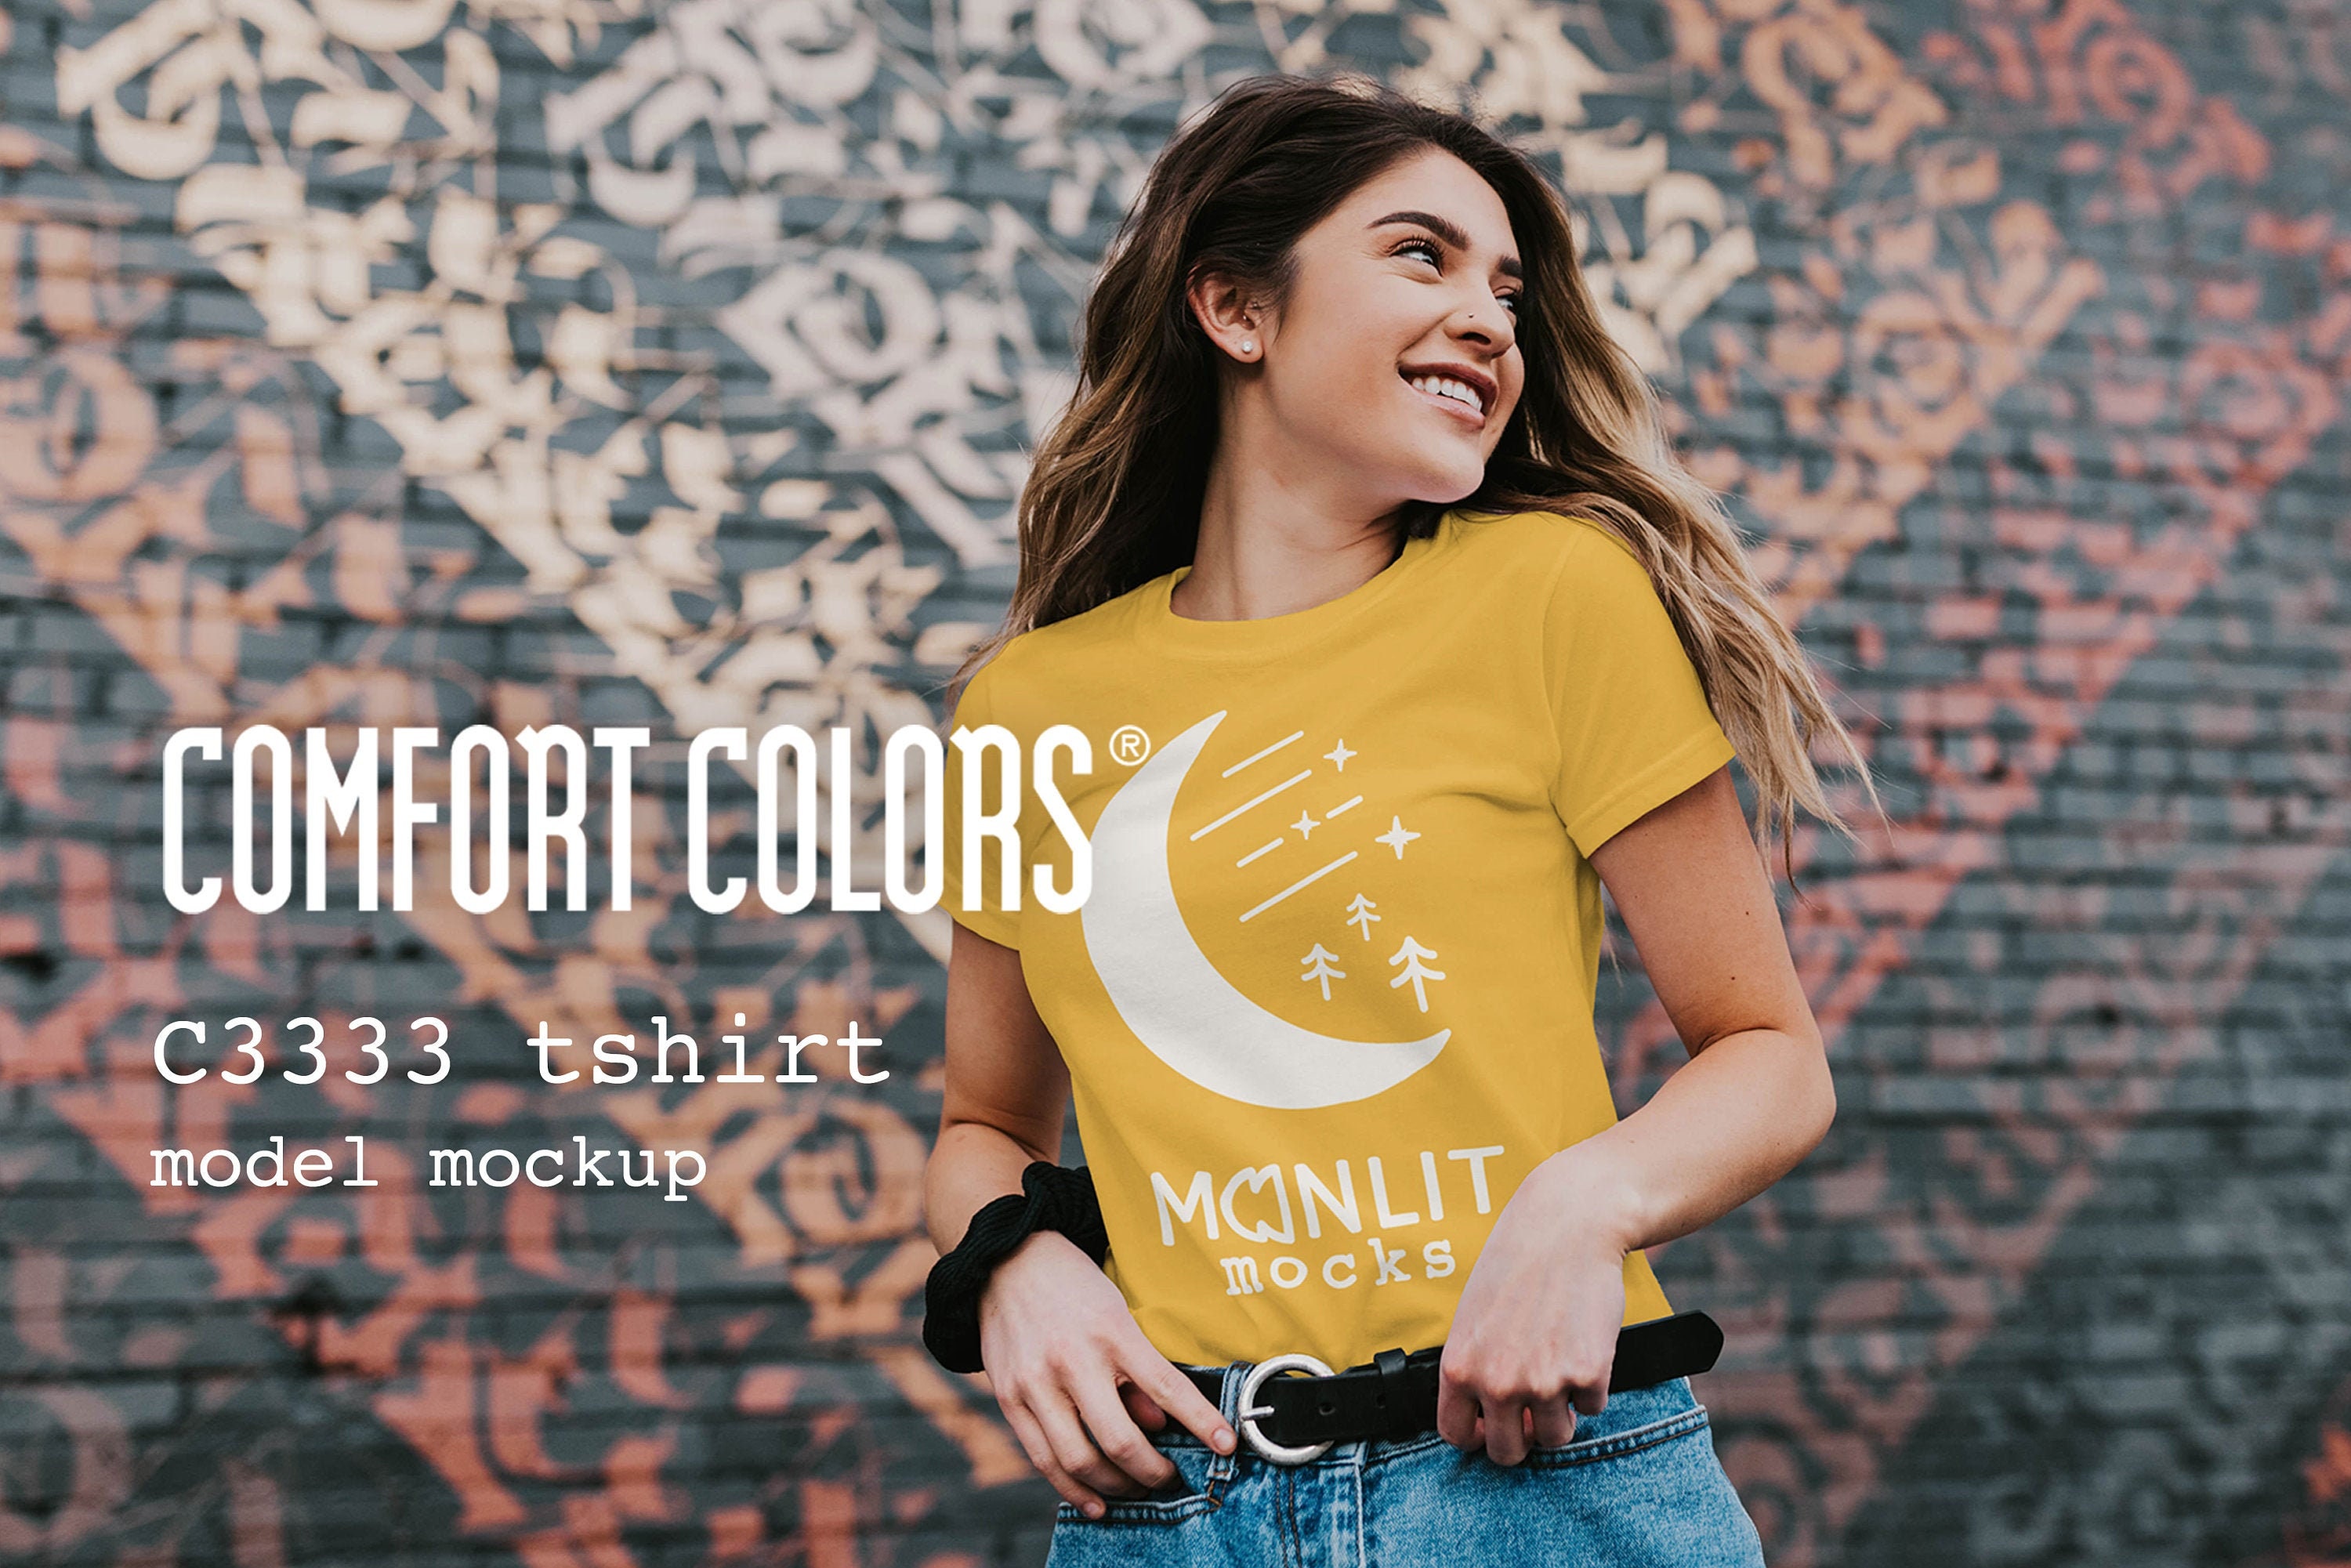 Download Every Color T Shirt Mockup Comfort Colors C3333 Women S Etsy